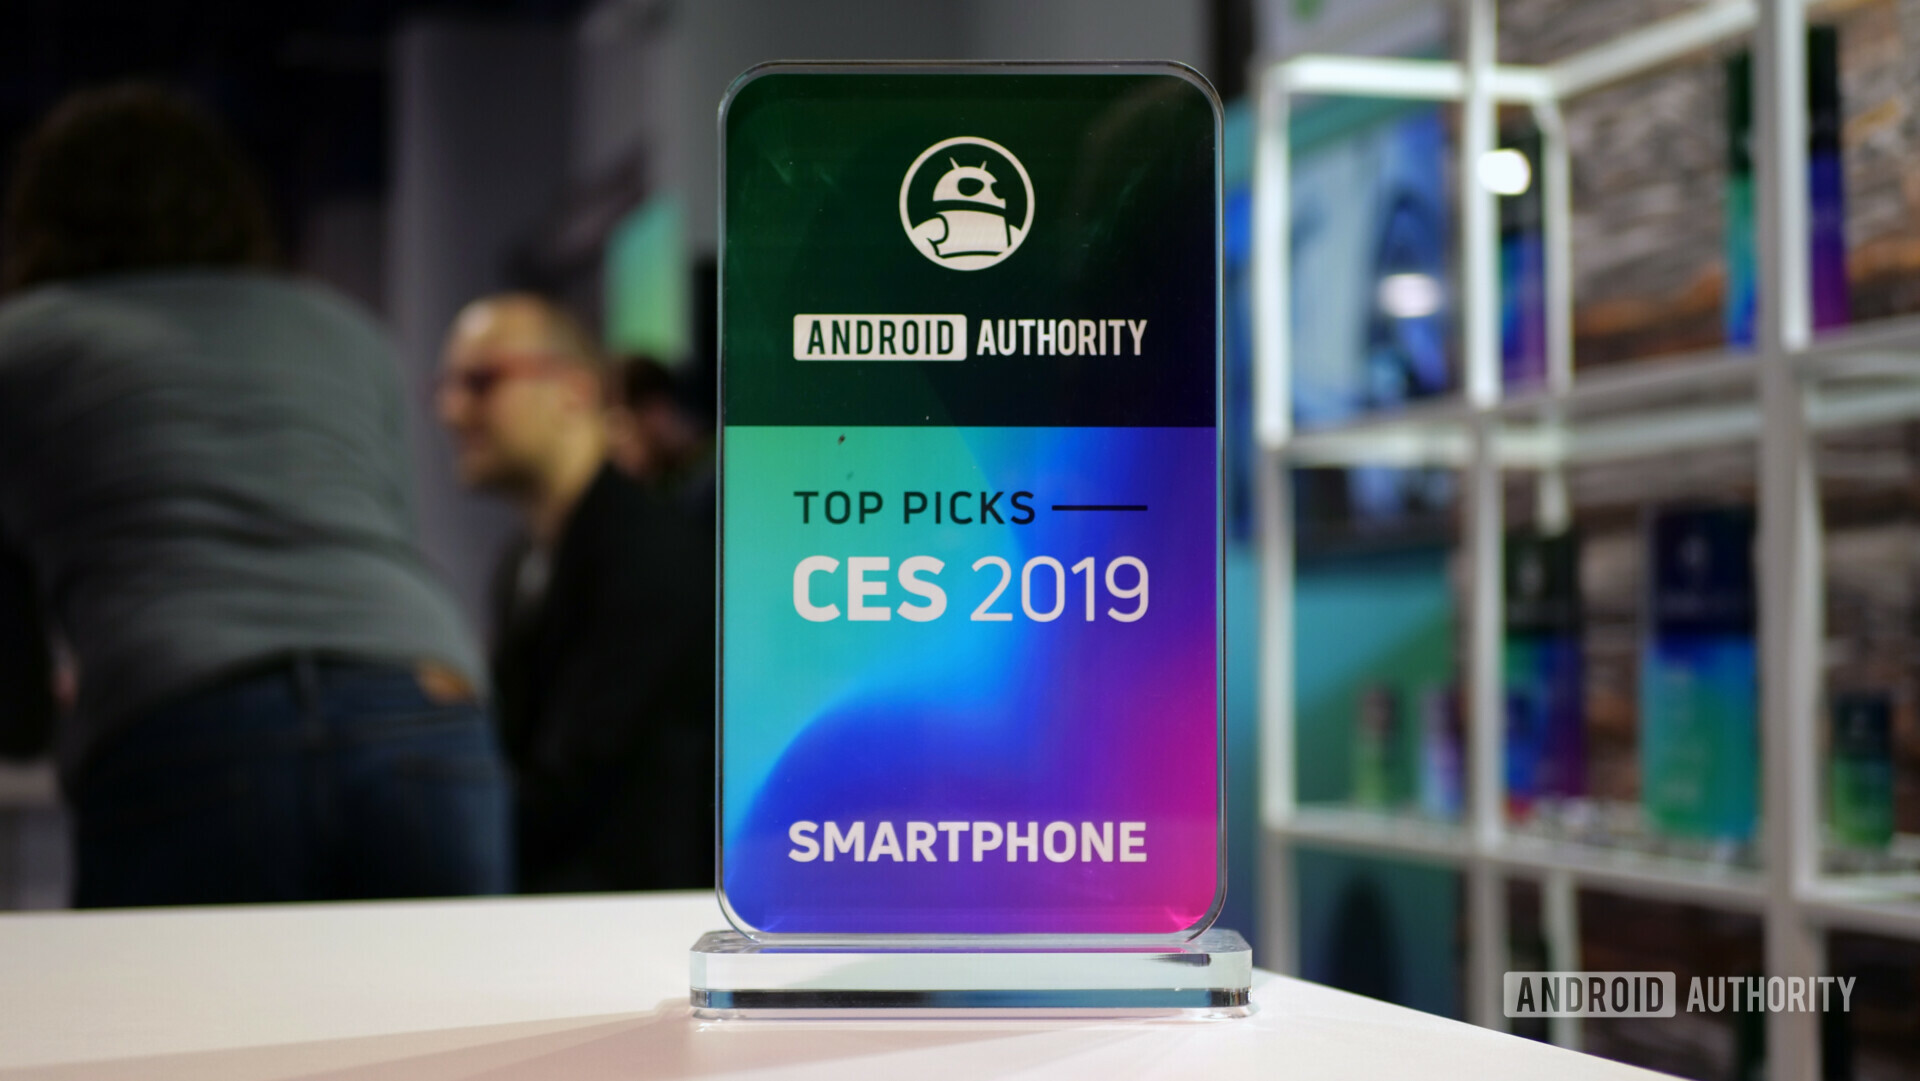 Our best of CES awards are included in our CES 2019 wrap up